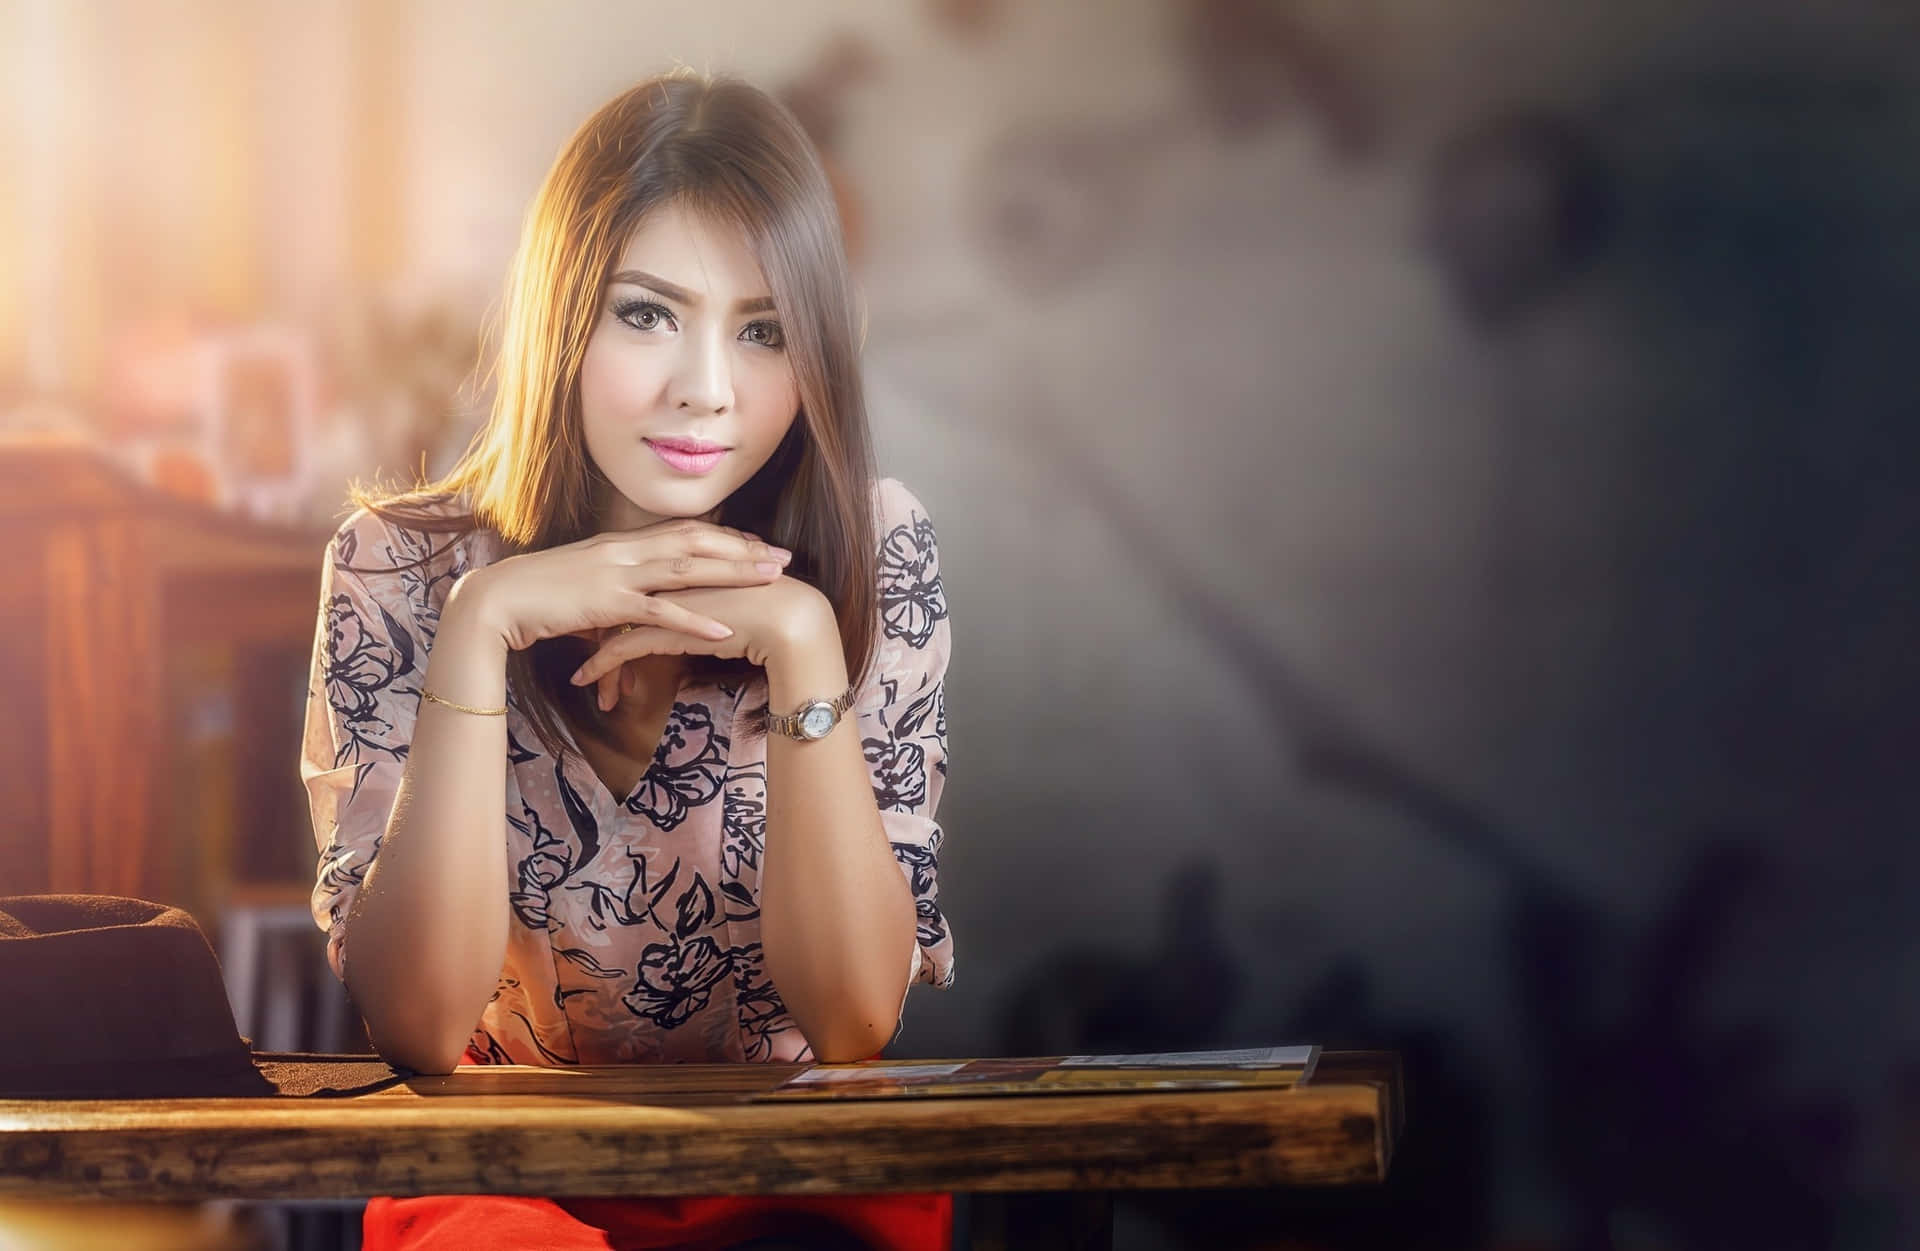 Caption: A Thai Girl Leaning on a Wooden Desk in Traditional Attire Wallpaper